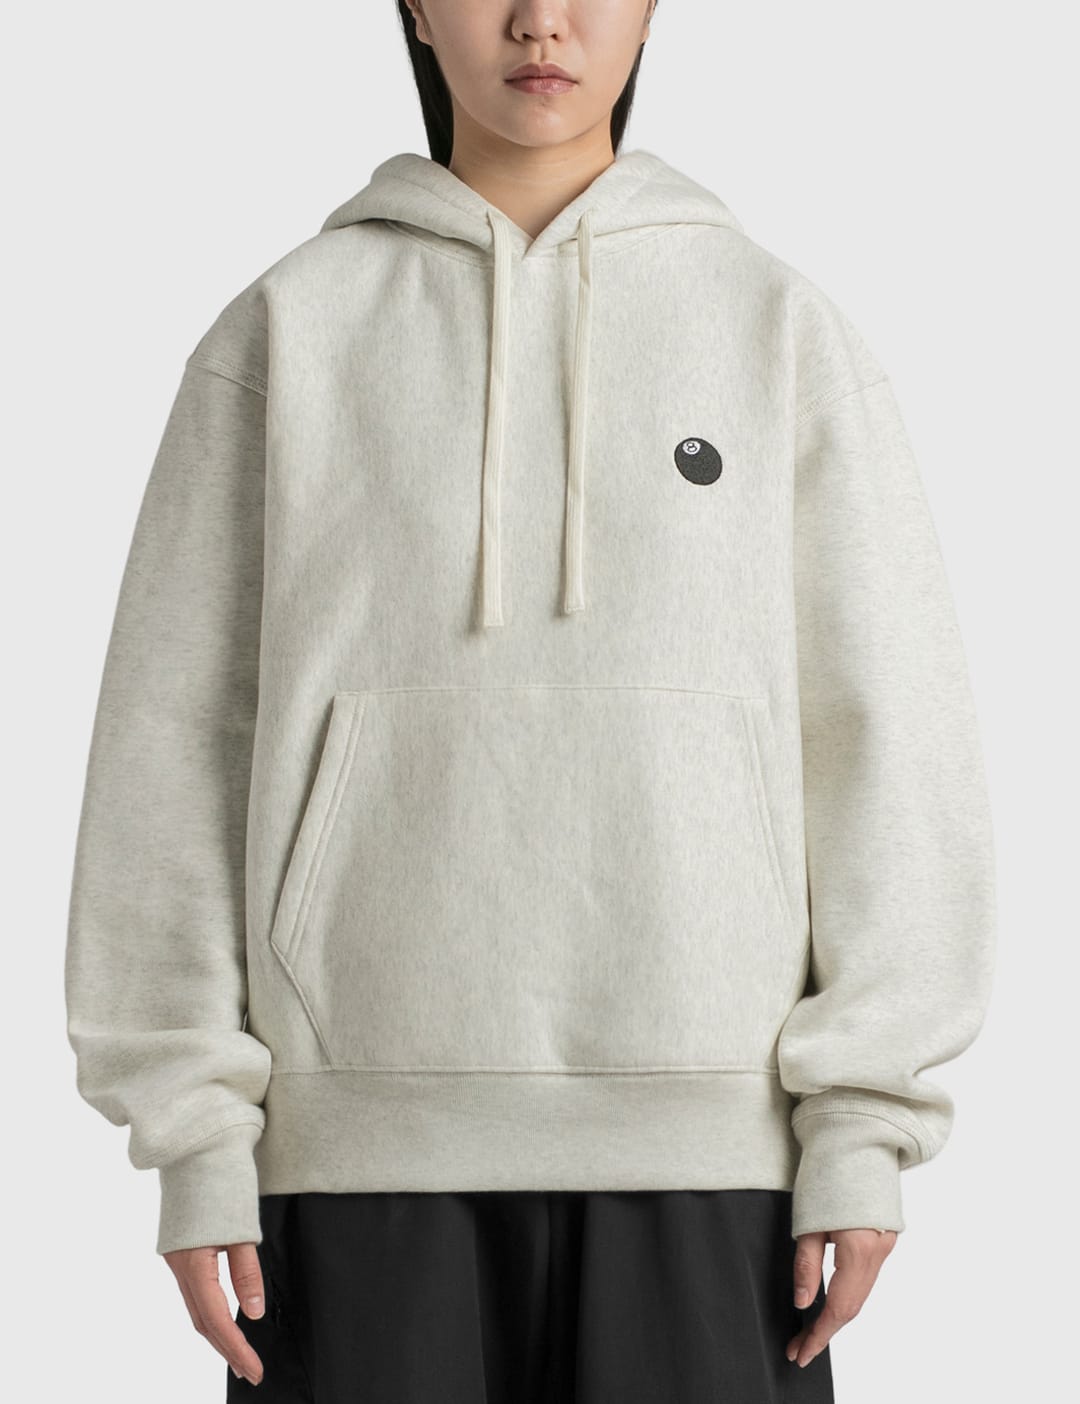 Stüssy - 8 Ball Embroidered Hoodie | HBX - Globally Curated 